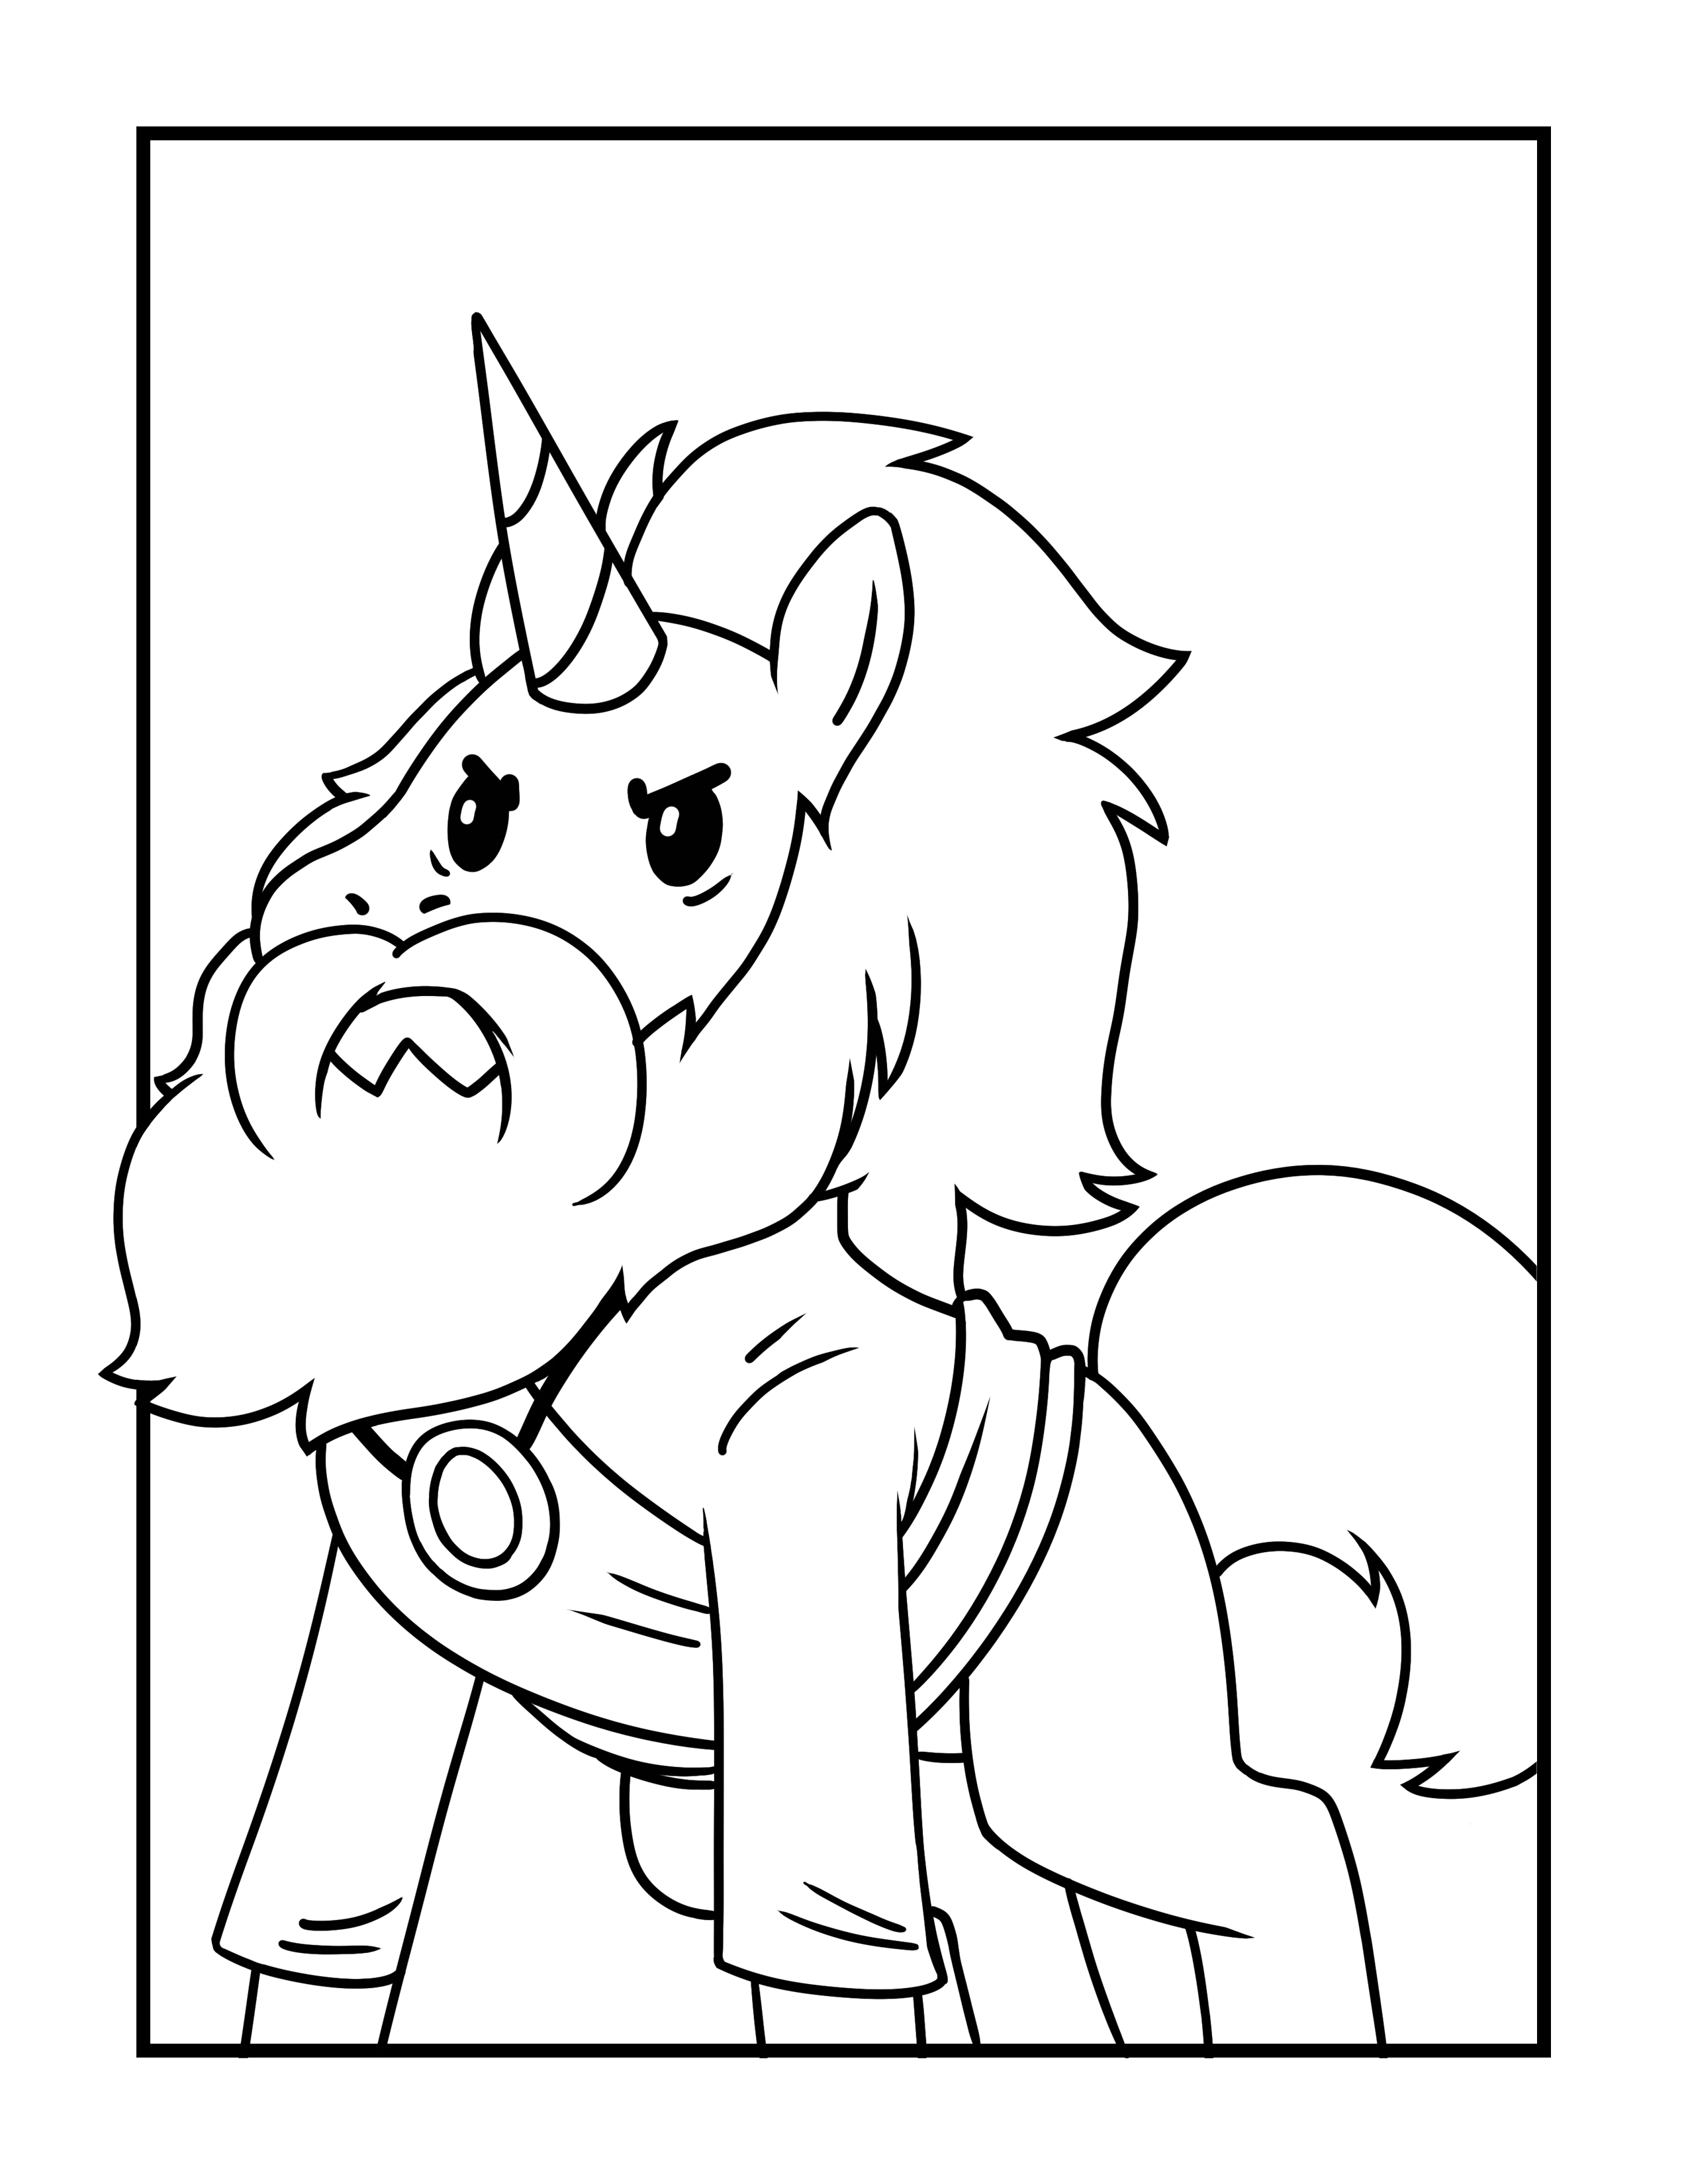 File:UU-Coloring-Page 9 Unicorn-Prophet.jpg - Unstable Games Wiki